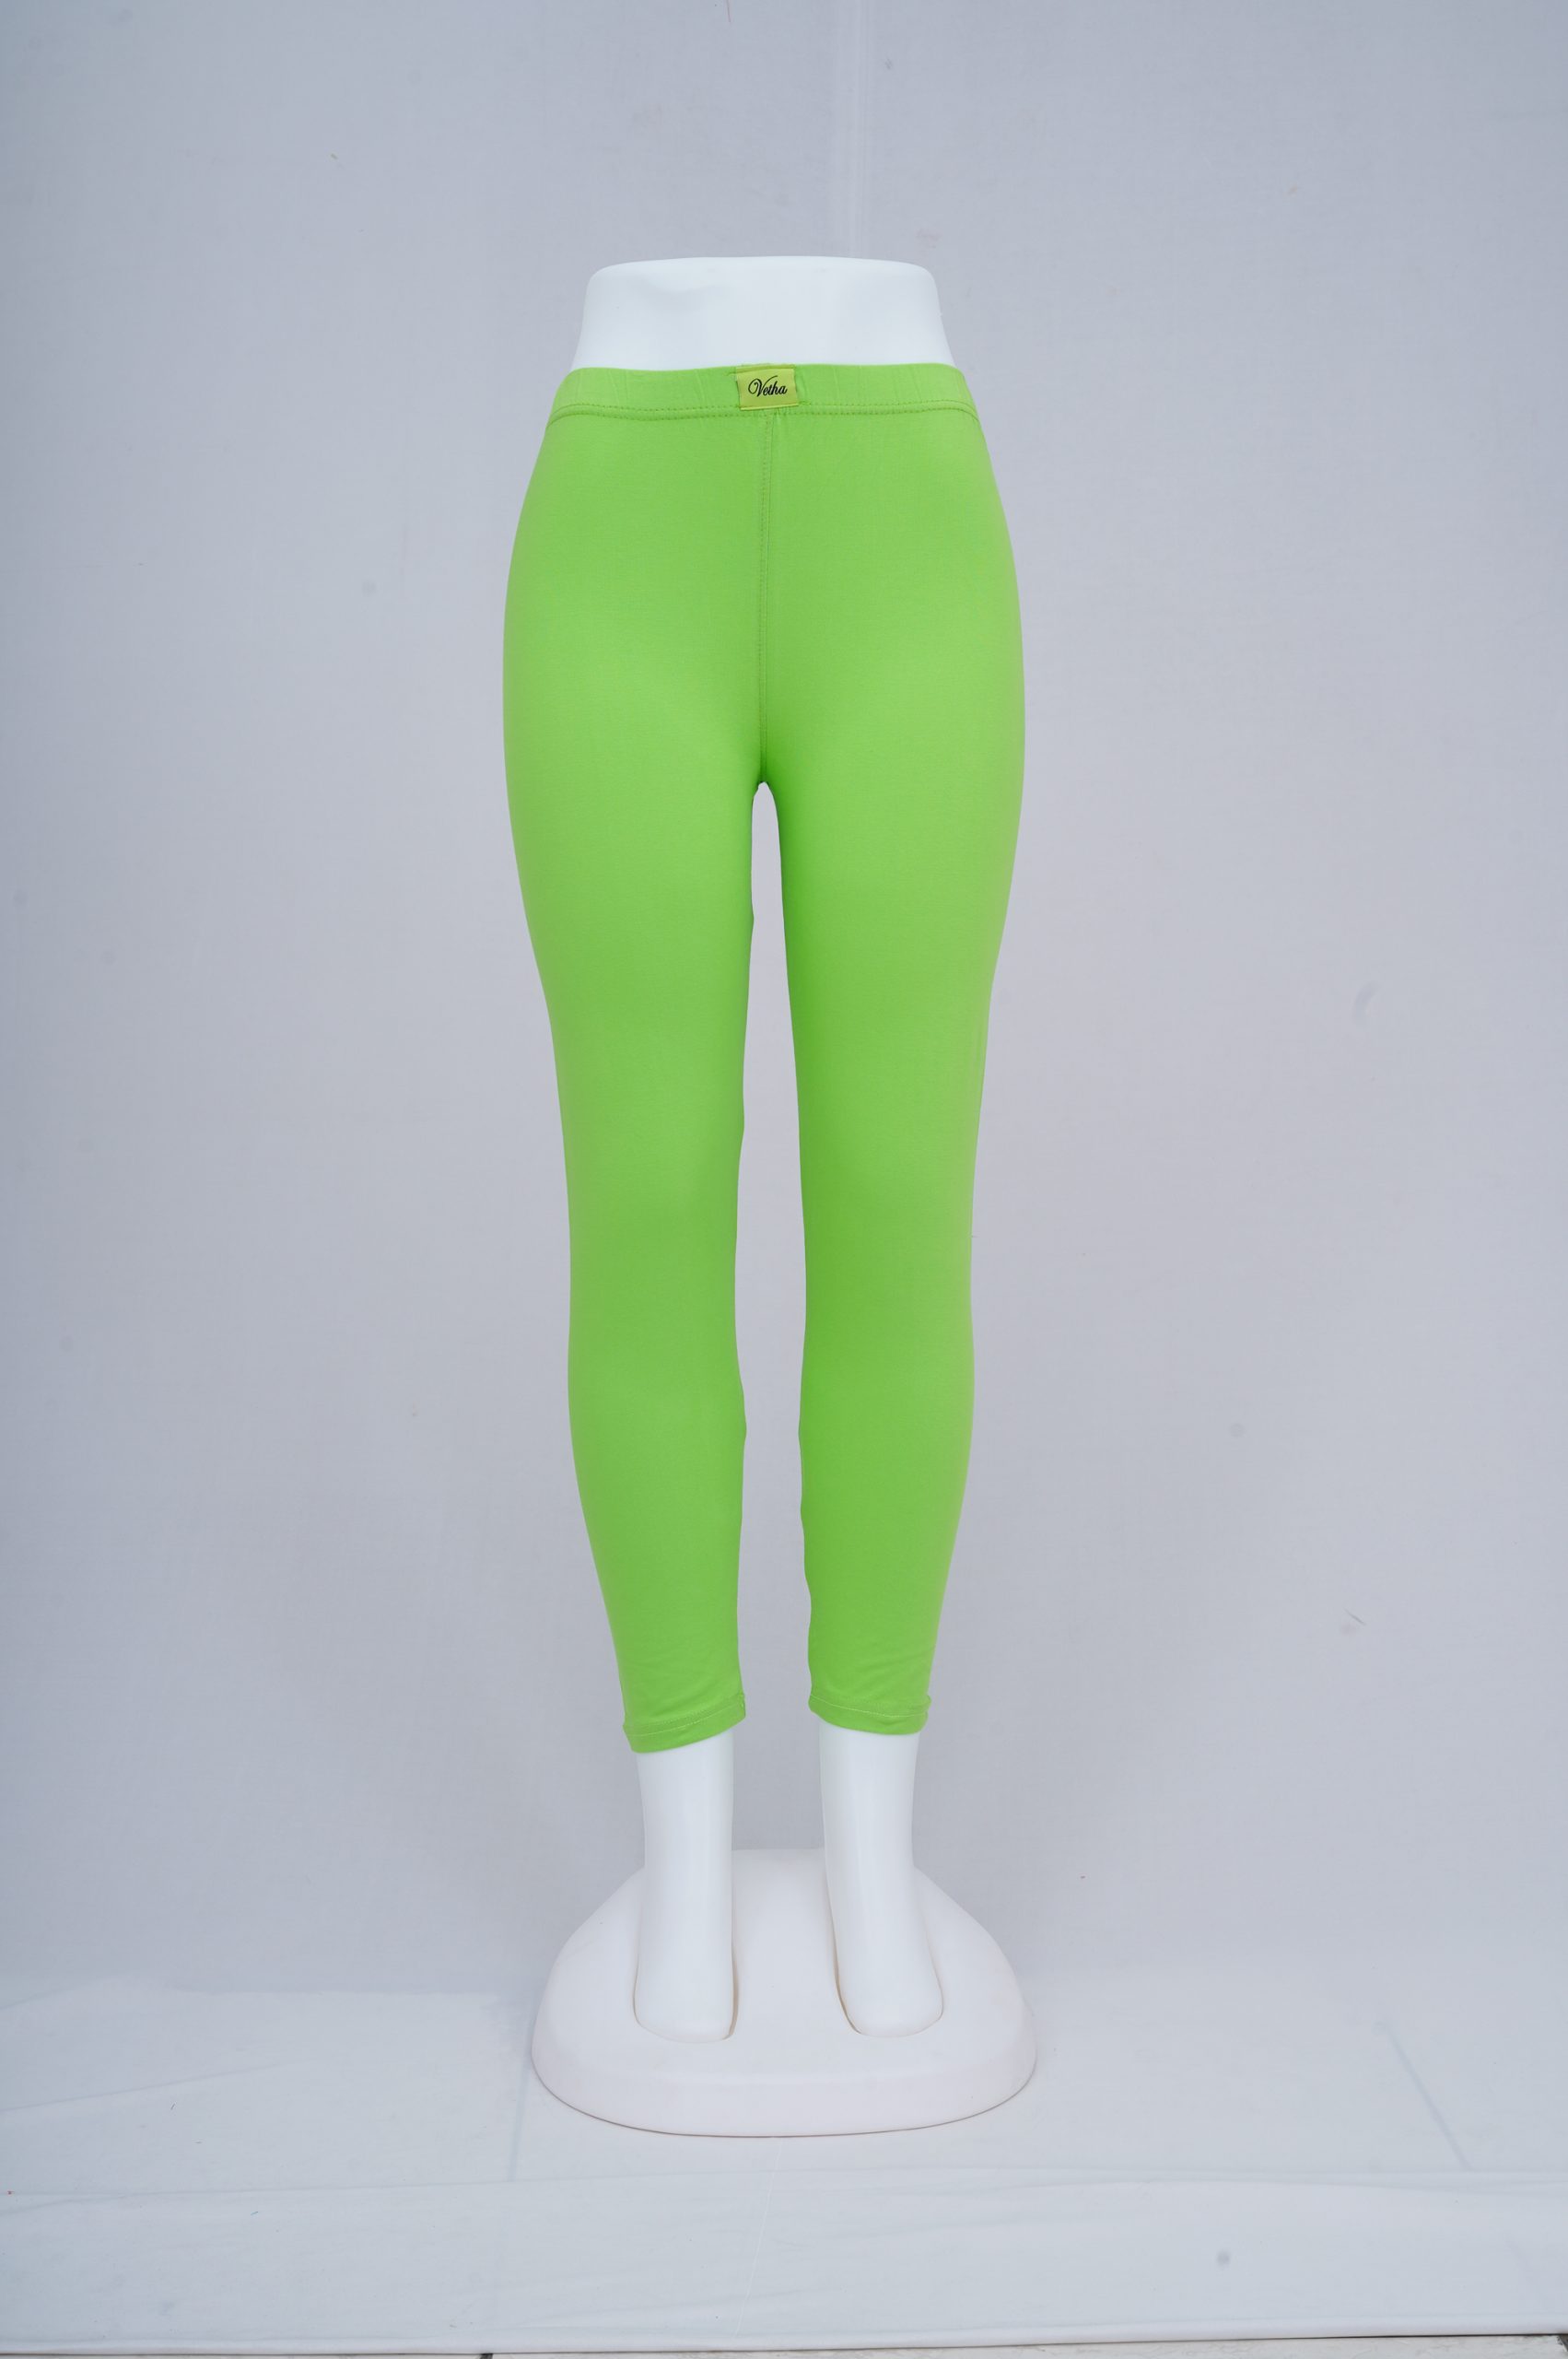 Light Up Leggings | Your Next Party Wear – dilutee-cheohanoi.vn